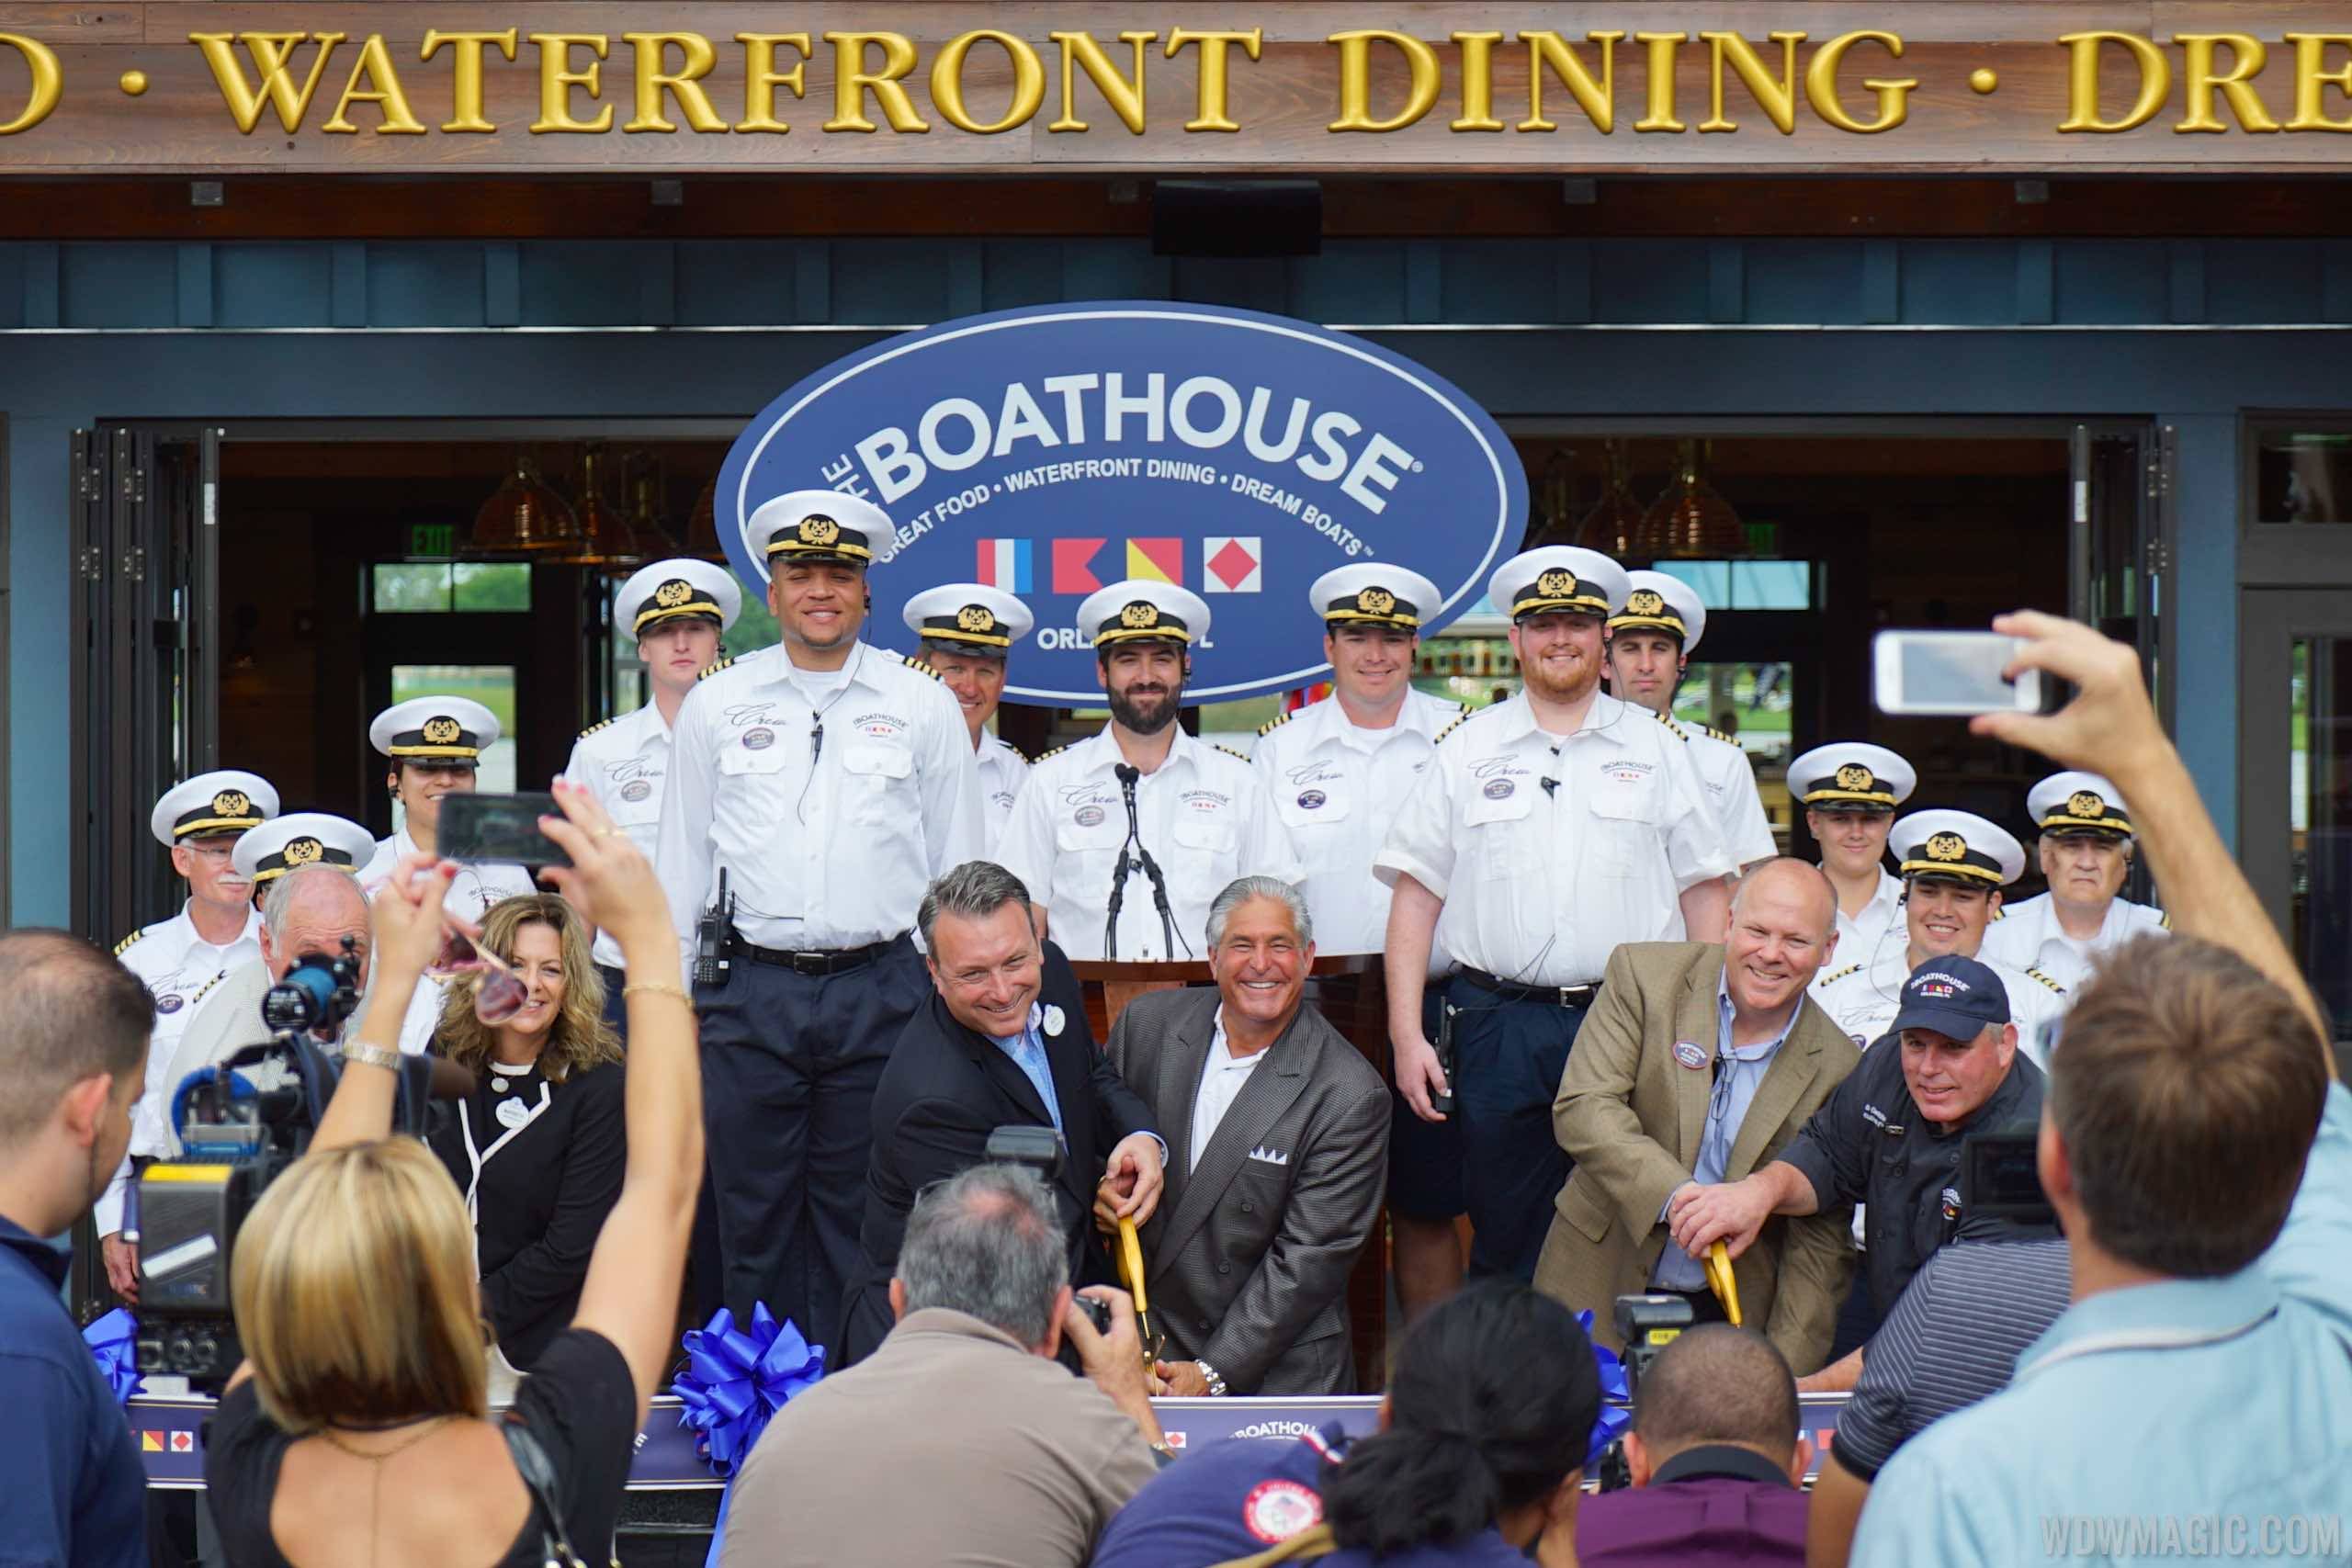 Keith Bradford at the The BOATHOUSE - Grand opening ribbon cutting